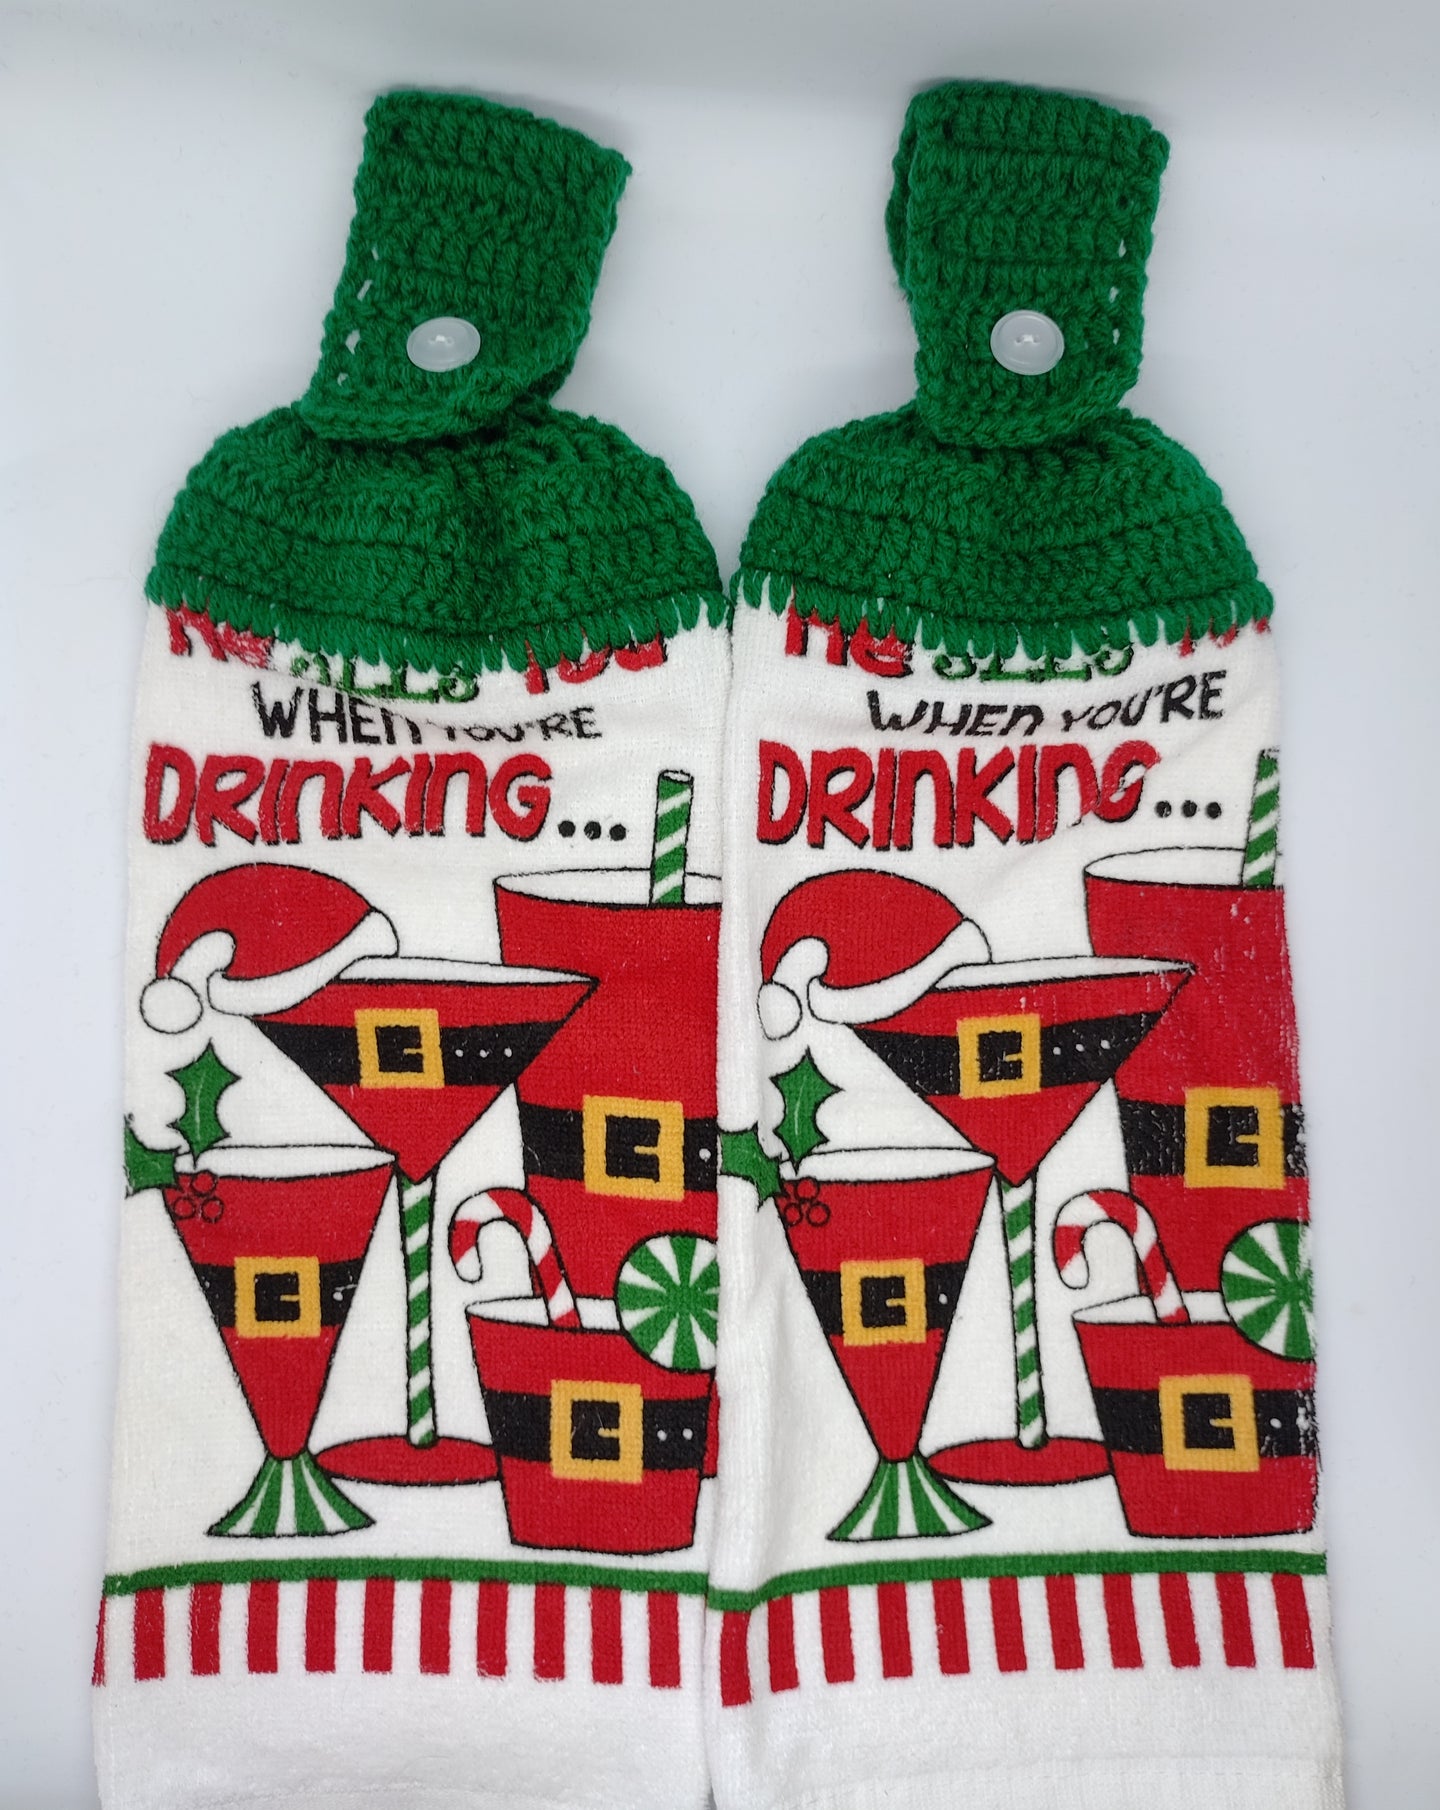 He Sees You When You're Drinking Christmas Hanging Kitchen Towel Set